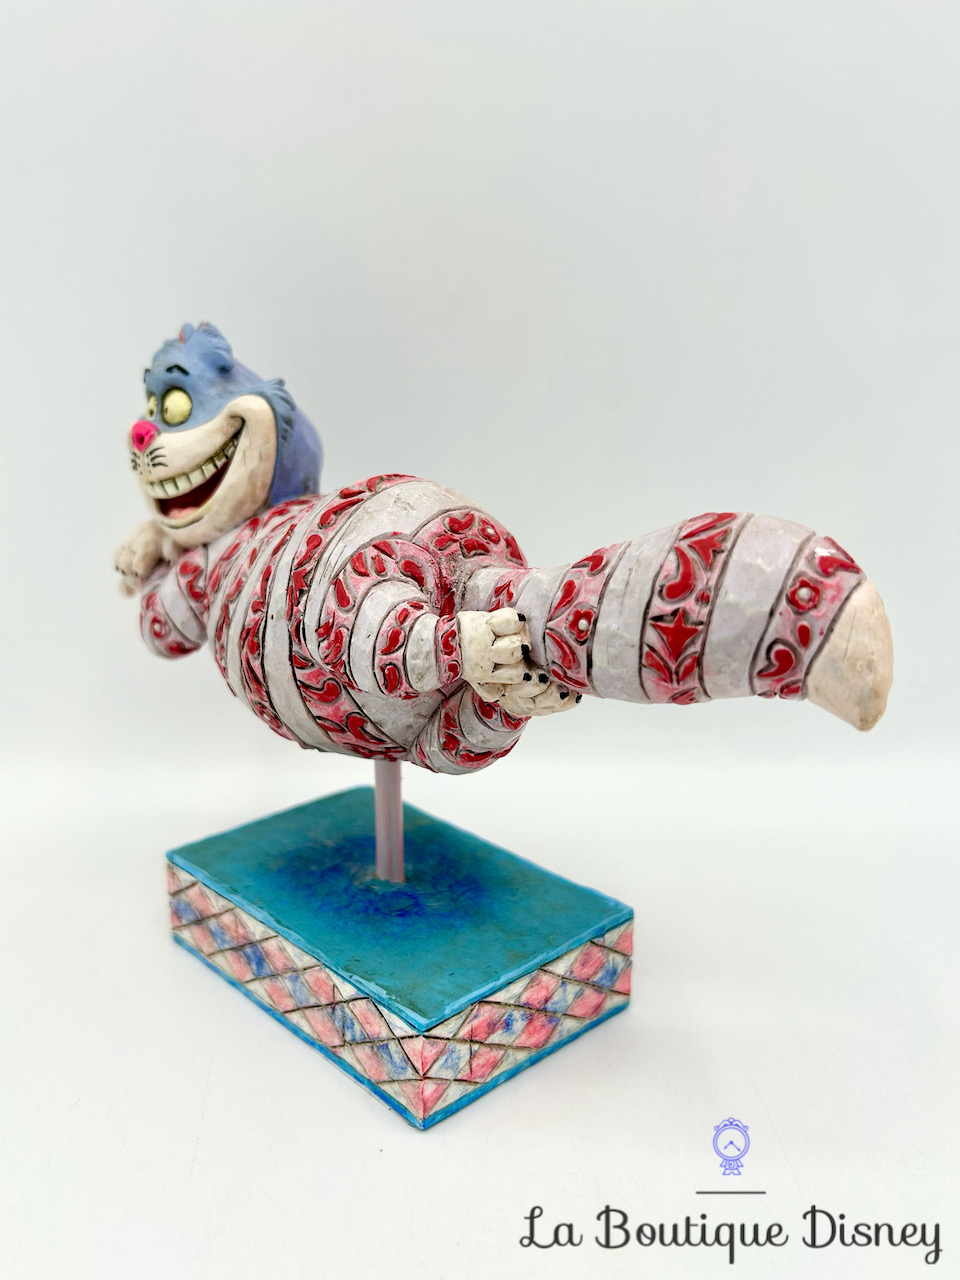 figurine-jim-shore-grinning-cheshire-alice-in-wonderland-disney-traditions-showcase-collection-enesco-4007211-alice-au-pays-des-merveilles-chat-cheshire-3